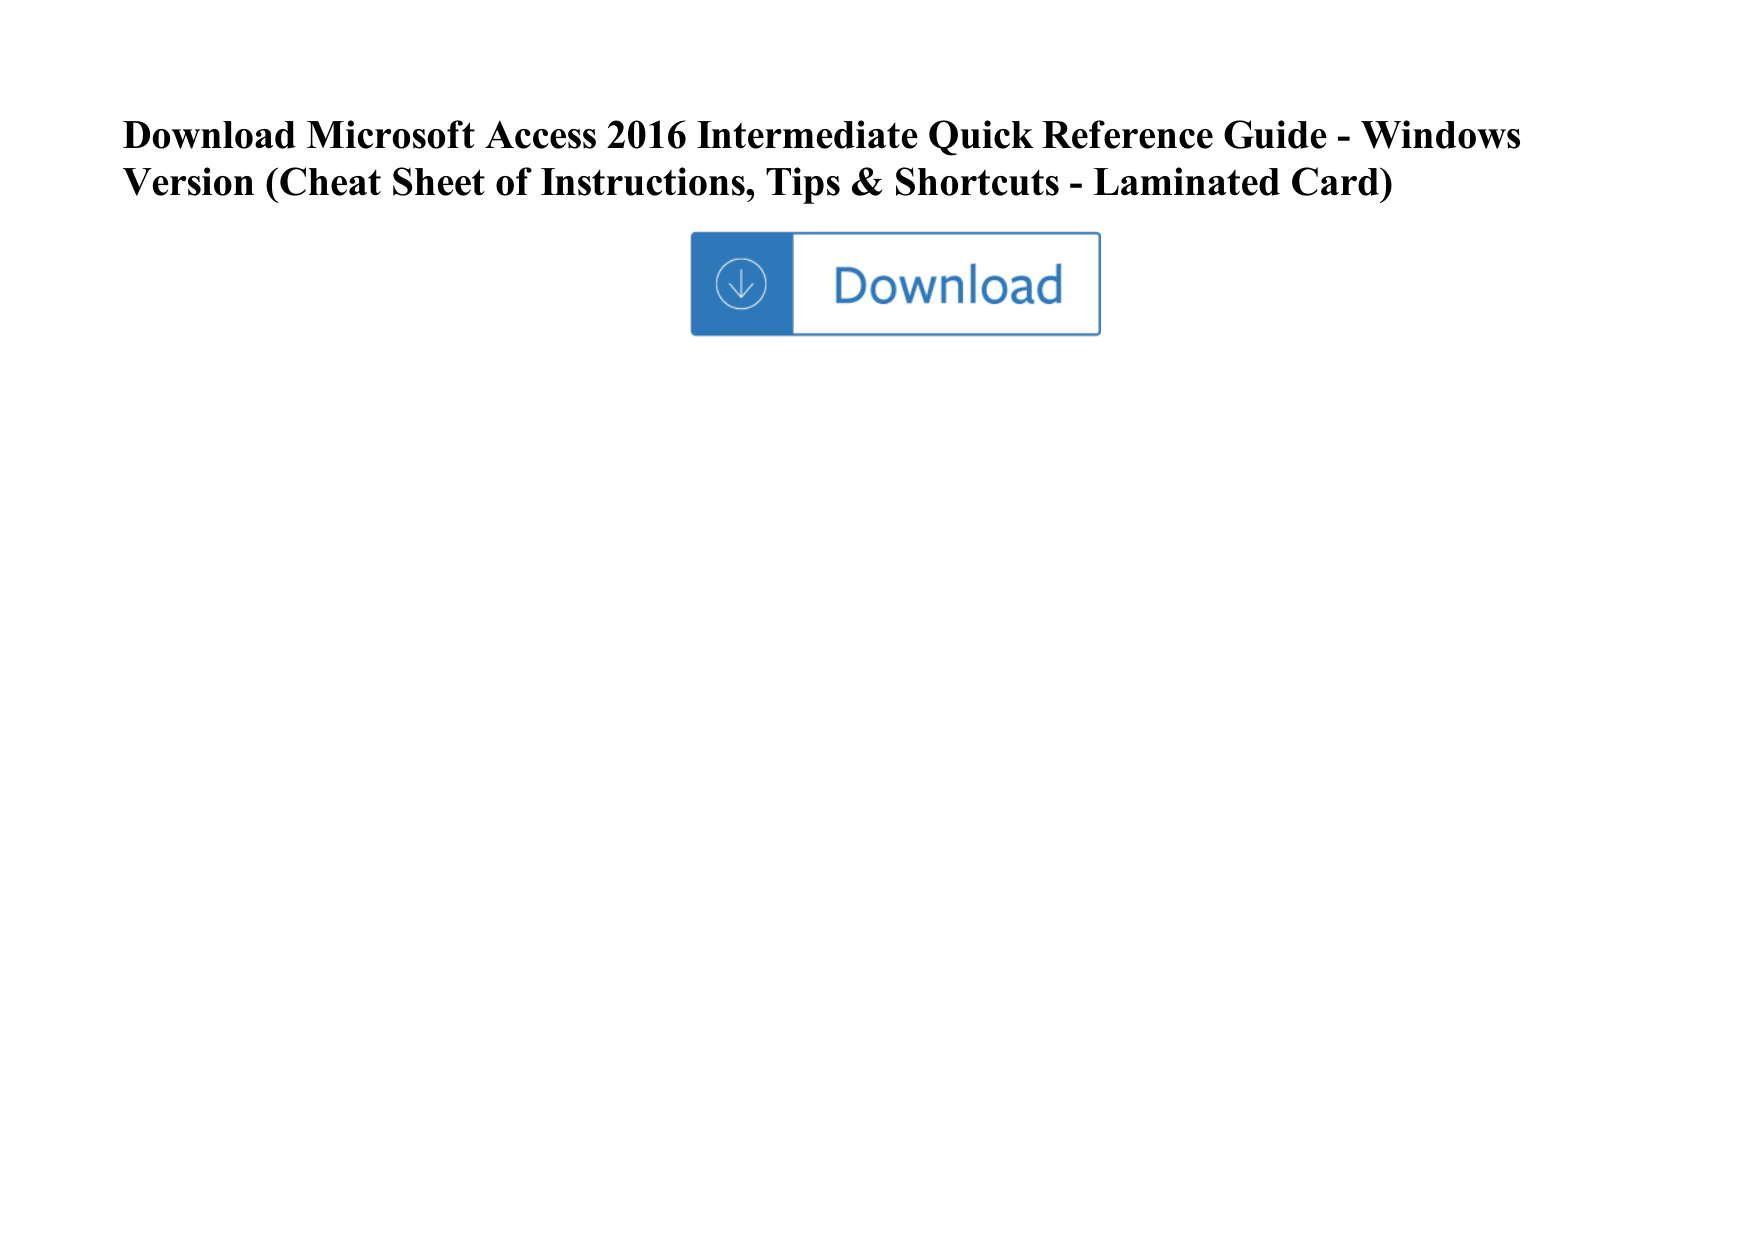 Page 1 of 1 - Microsoft Access 2016 Intermediate Quick Reference Guide - Windows Version (Cheat Sheet Of Instructions, Tips & Shortcuts  Microsoft-access-2016-intermediate-quick-reference-guide-windows-version-cheat-sheet-of-instructions-tips-shortcuts-laminated-ca